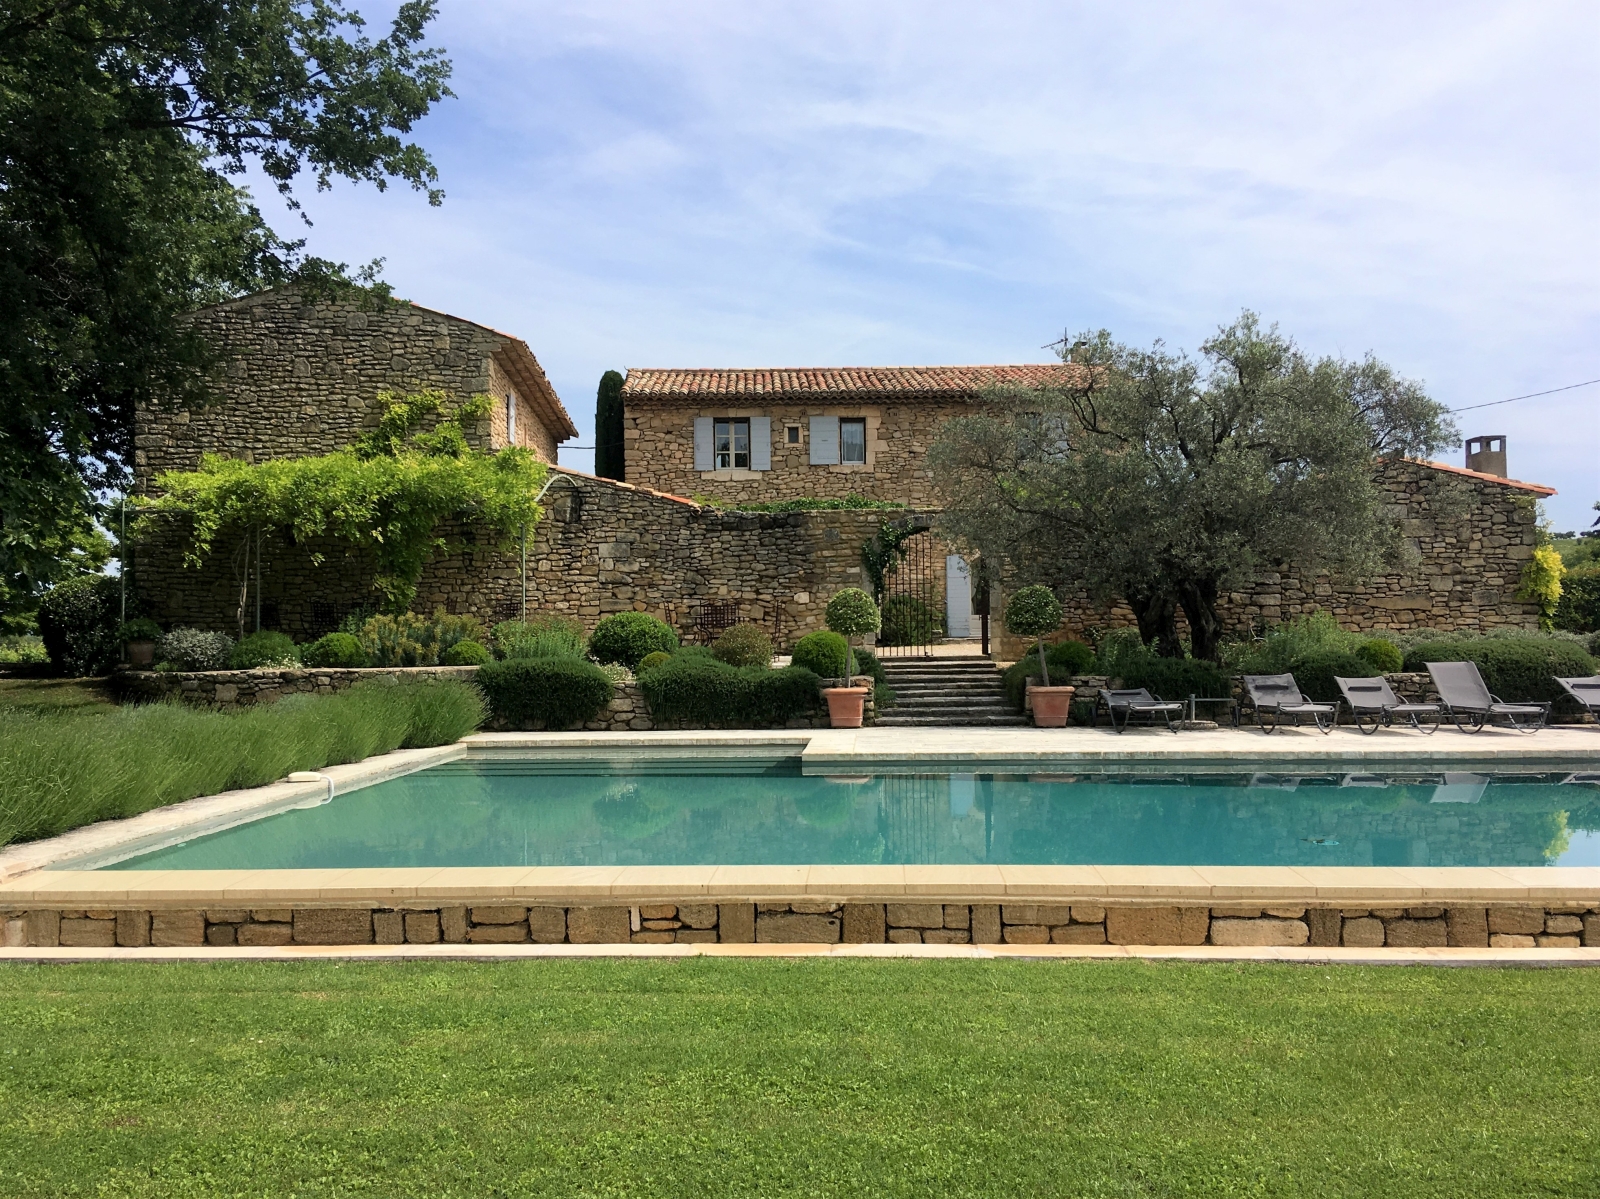 Swimming pool and pool area with sun loungers at Mas des Cerisiers in Provence, France